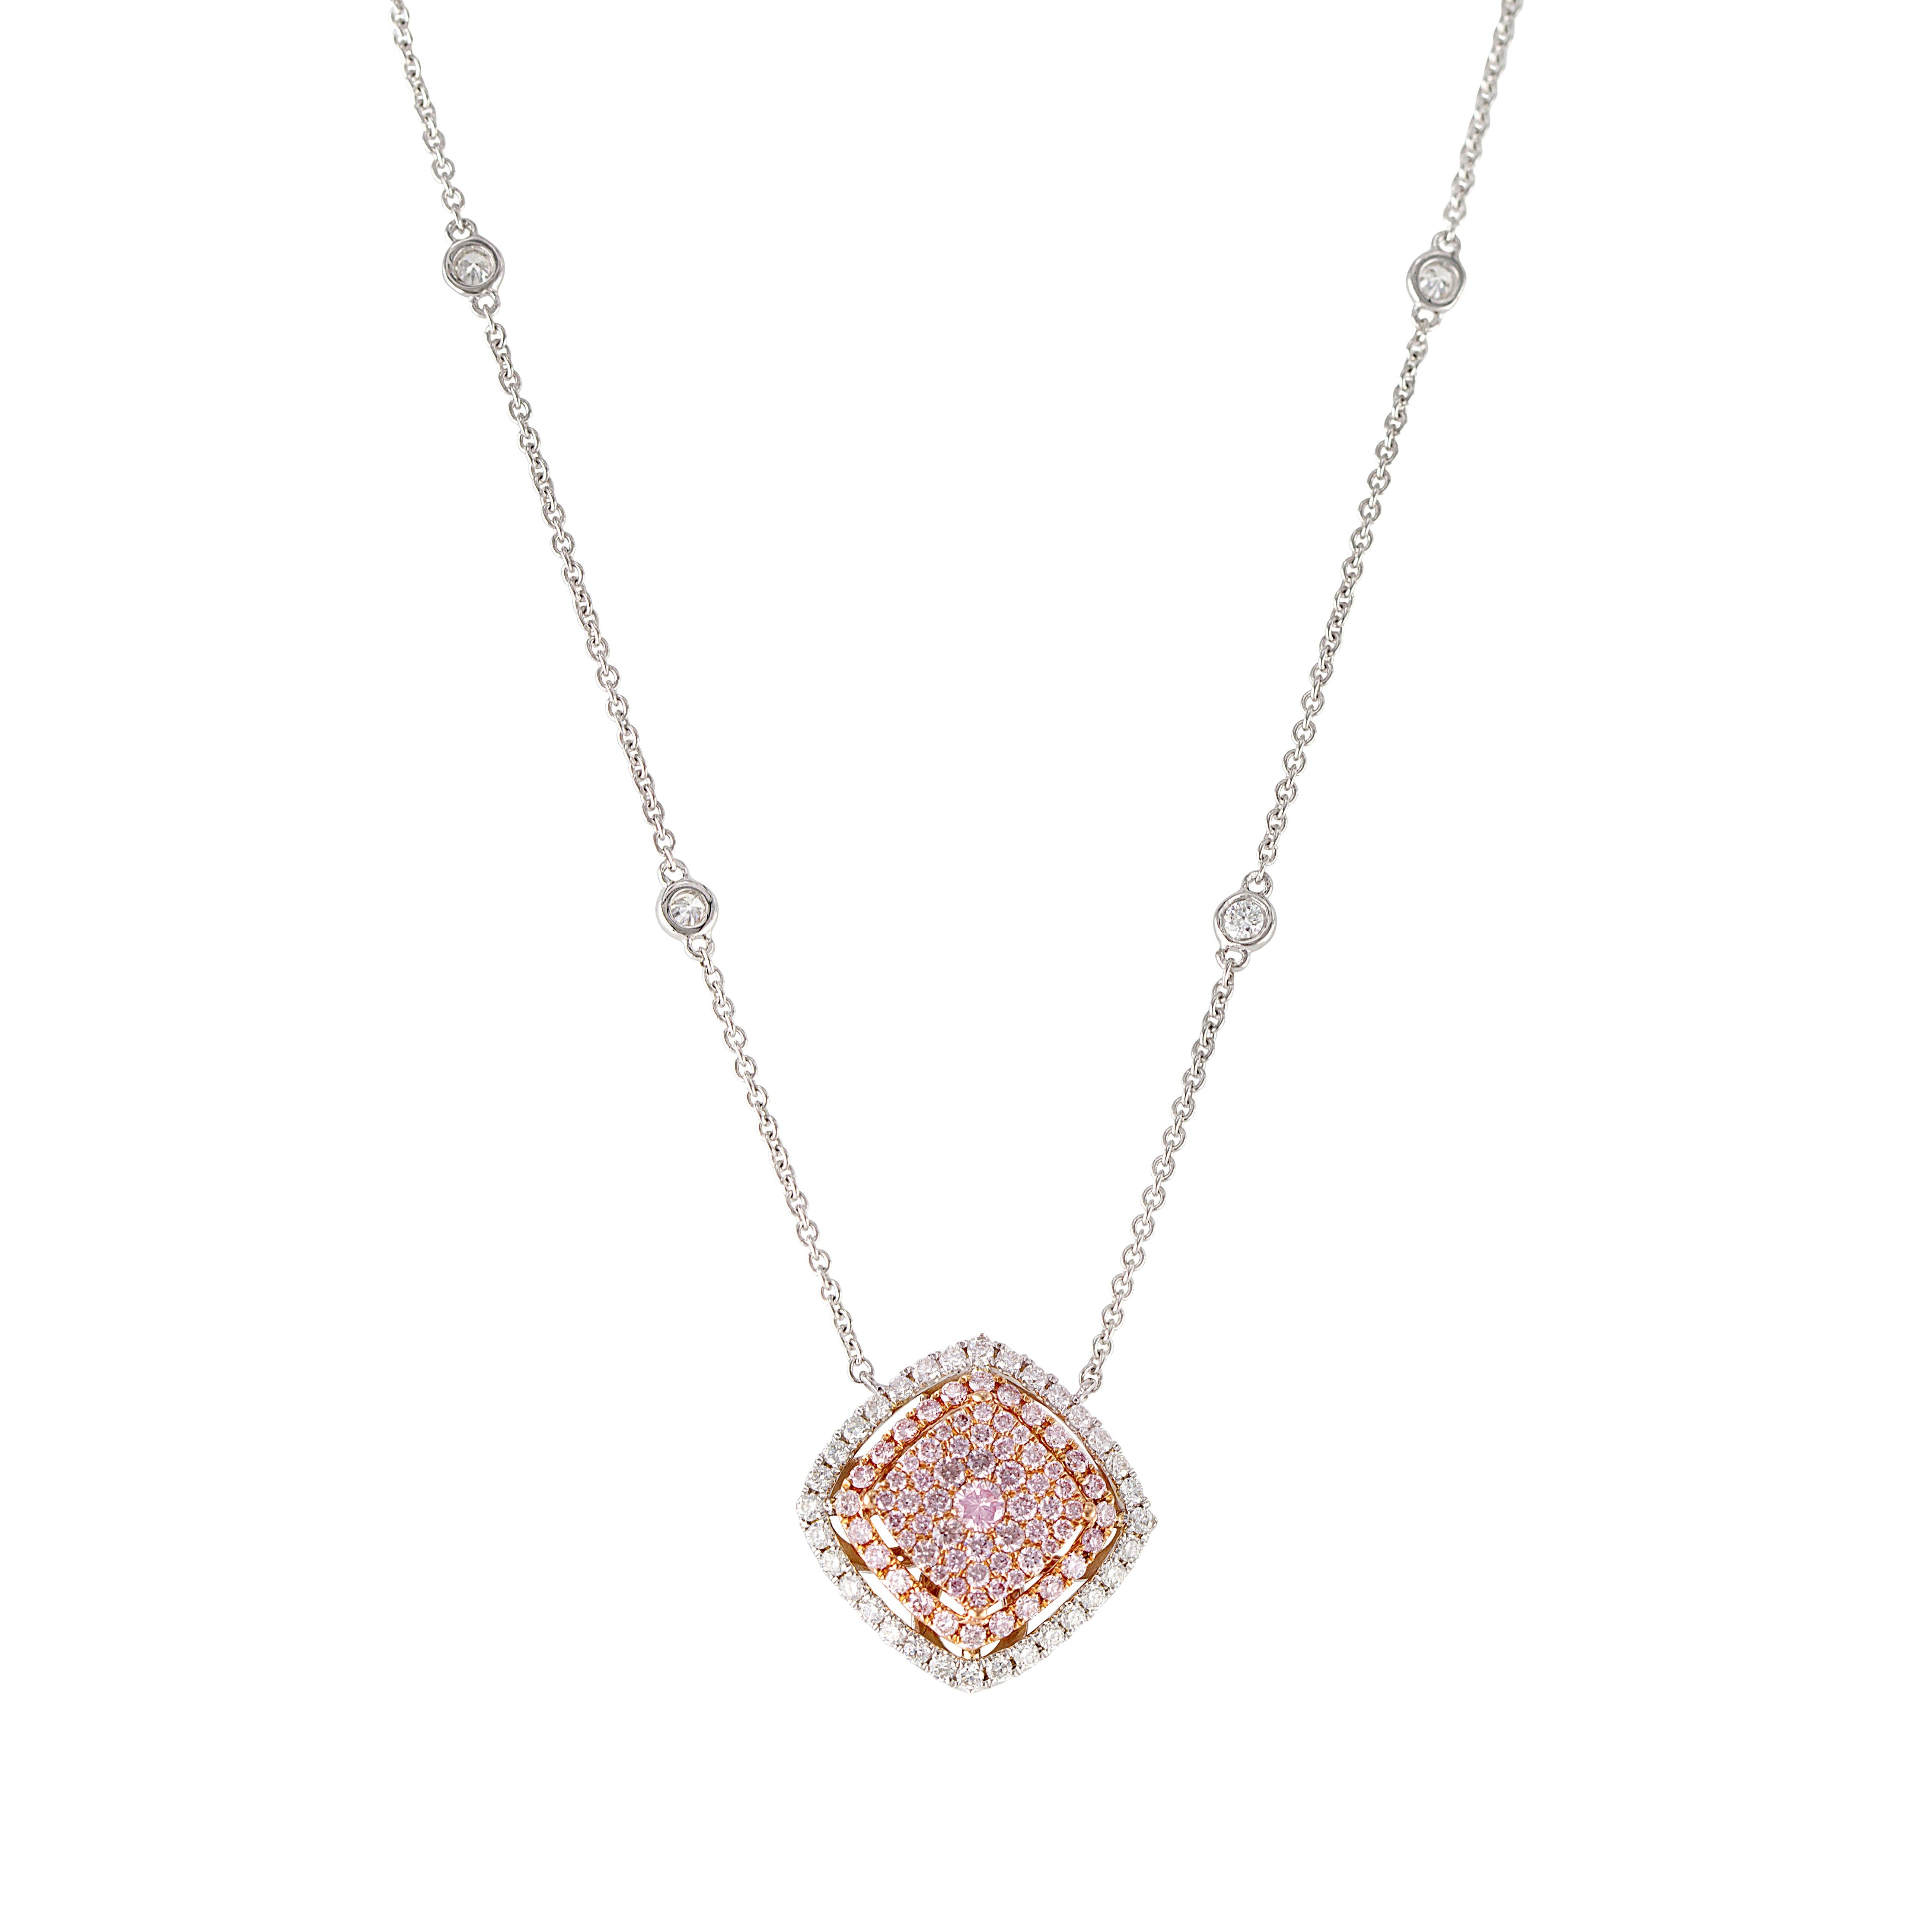 Elegance knows no bounds with our mesmerizing Pink Diamond Pendant. In its heart, an ensemble of multiple round pink diamonds meticulously conveys the allure of a perfect cushion shape, cradled by a radiant halo of round white diamonds. The 18-inch